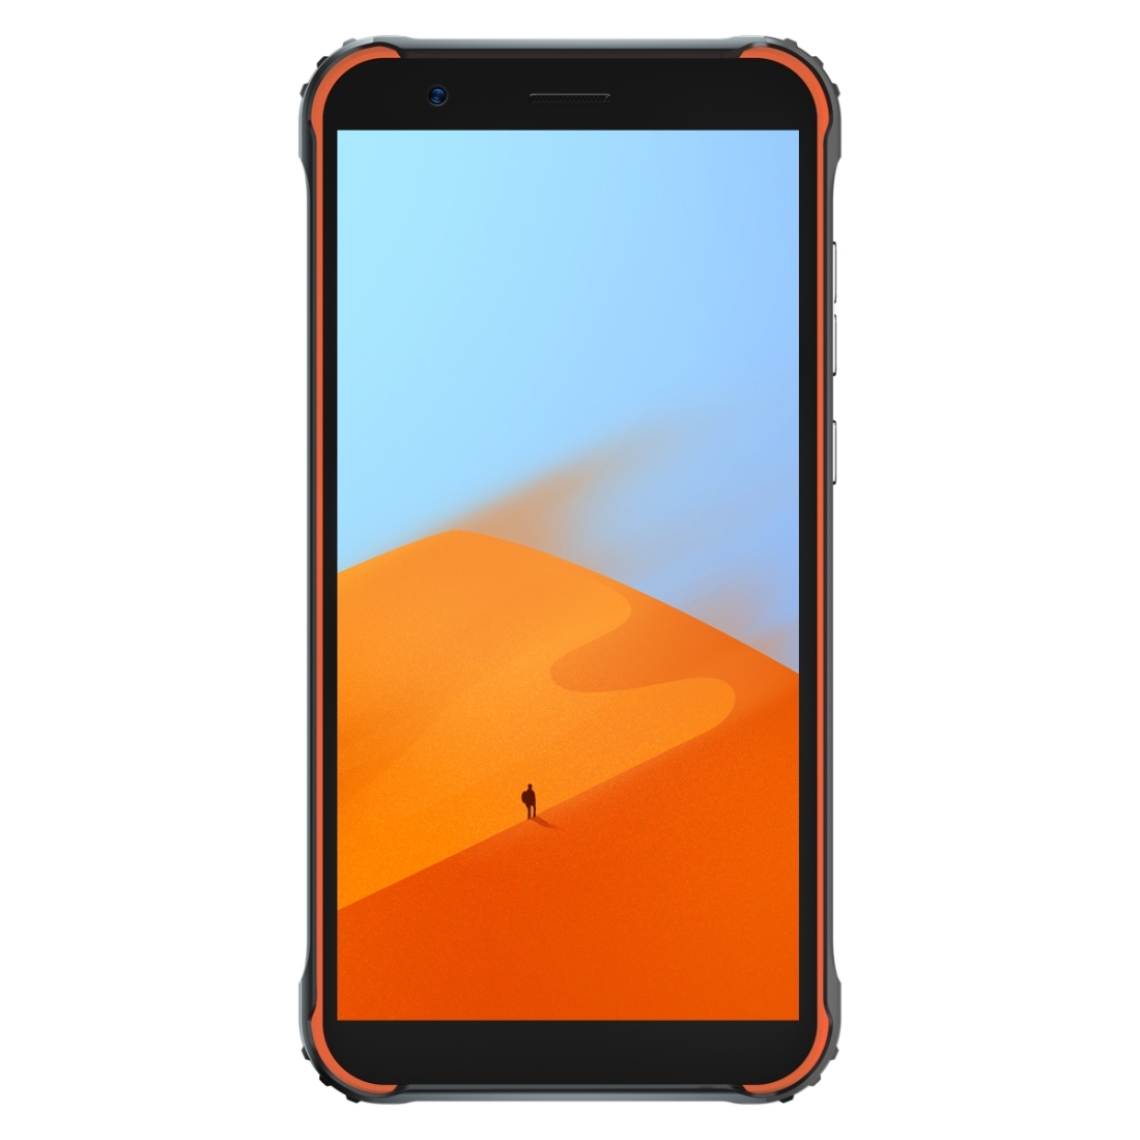 Yonis - Smartphone Incassable Android 10 4G - Smartphone Android